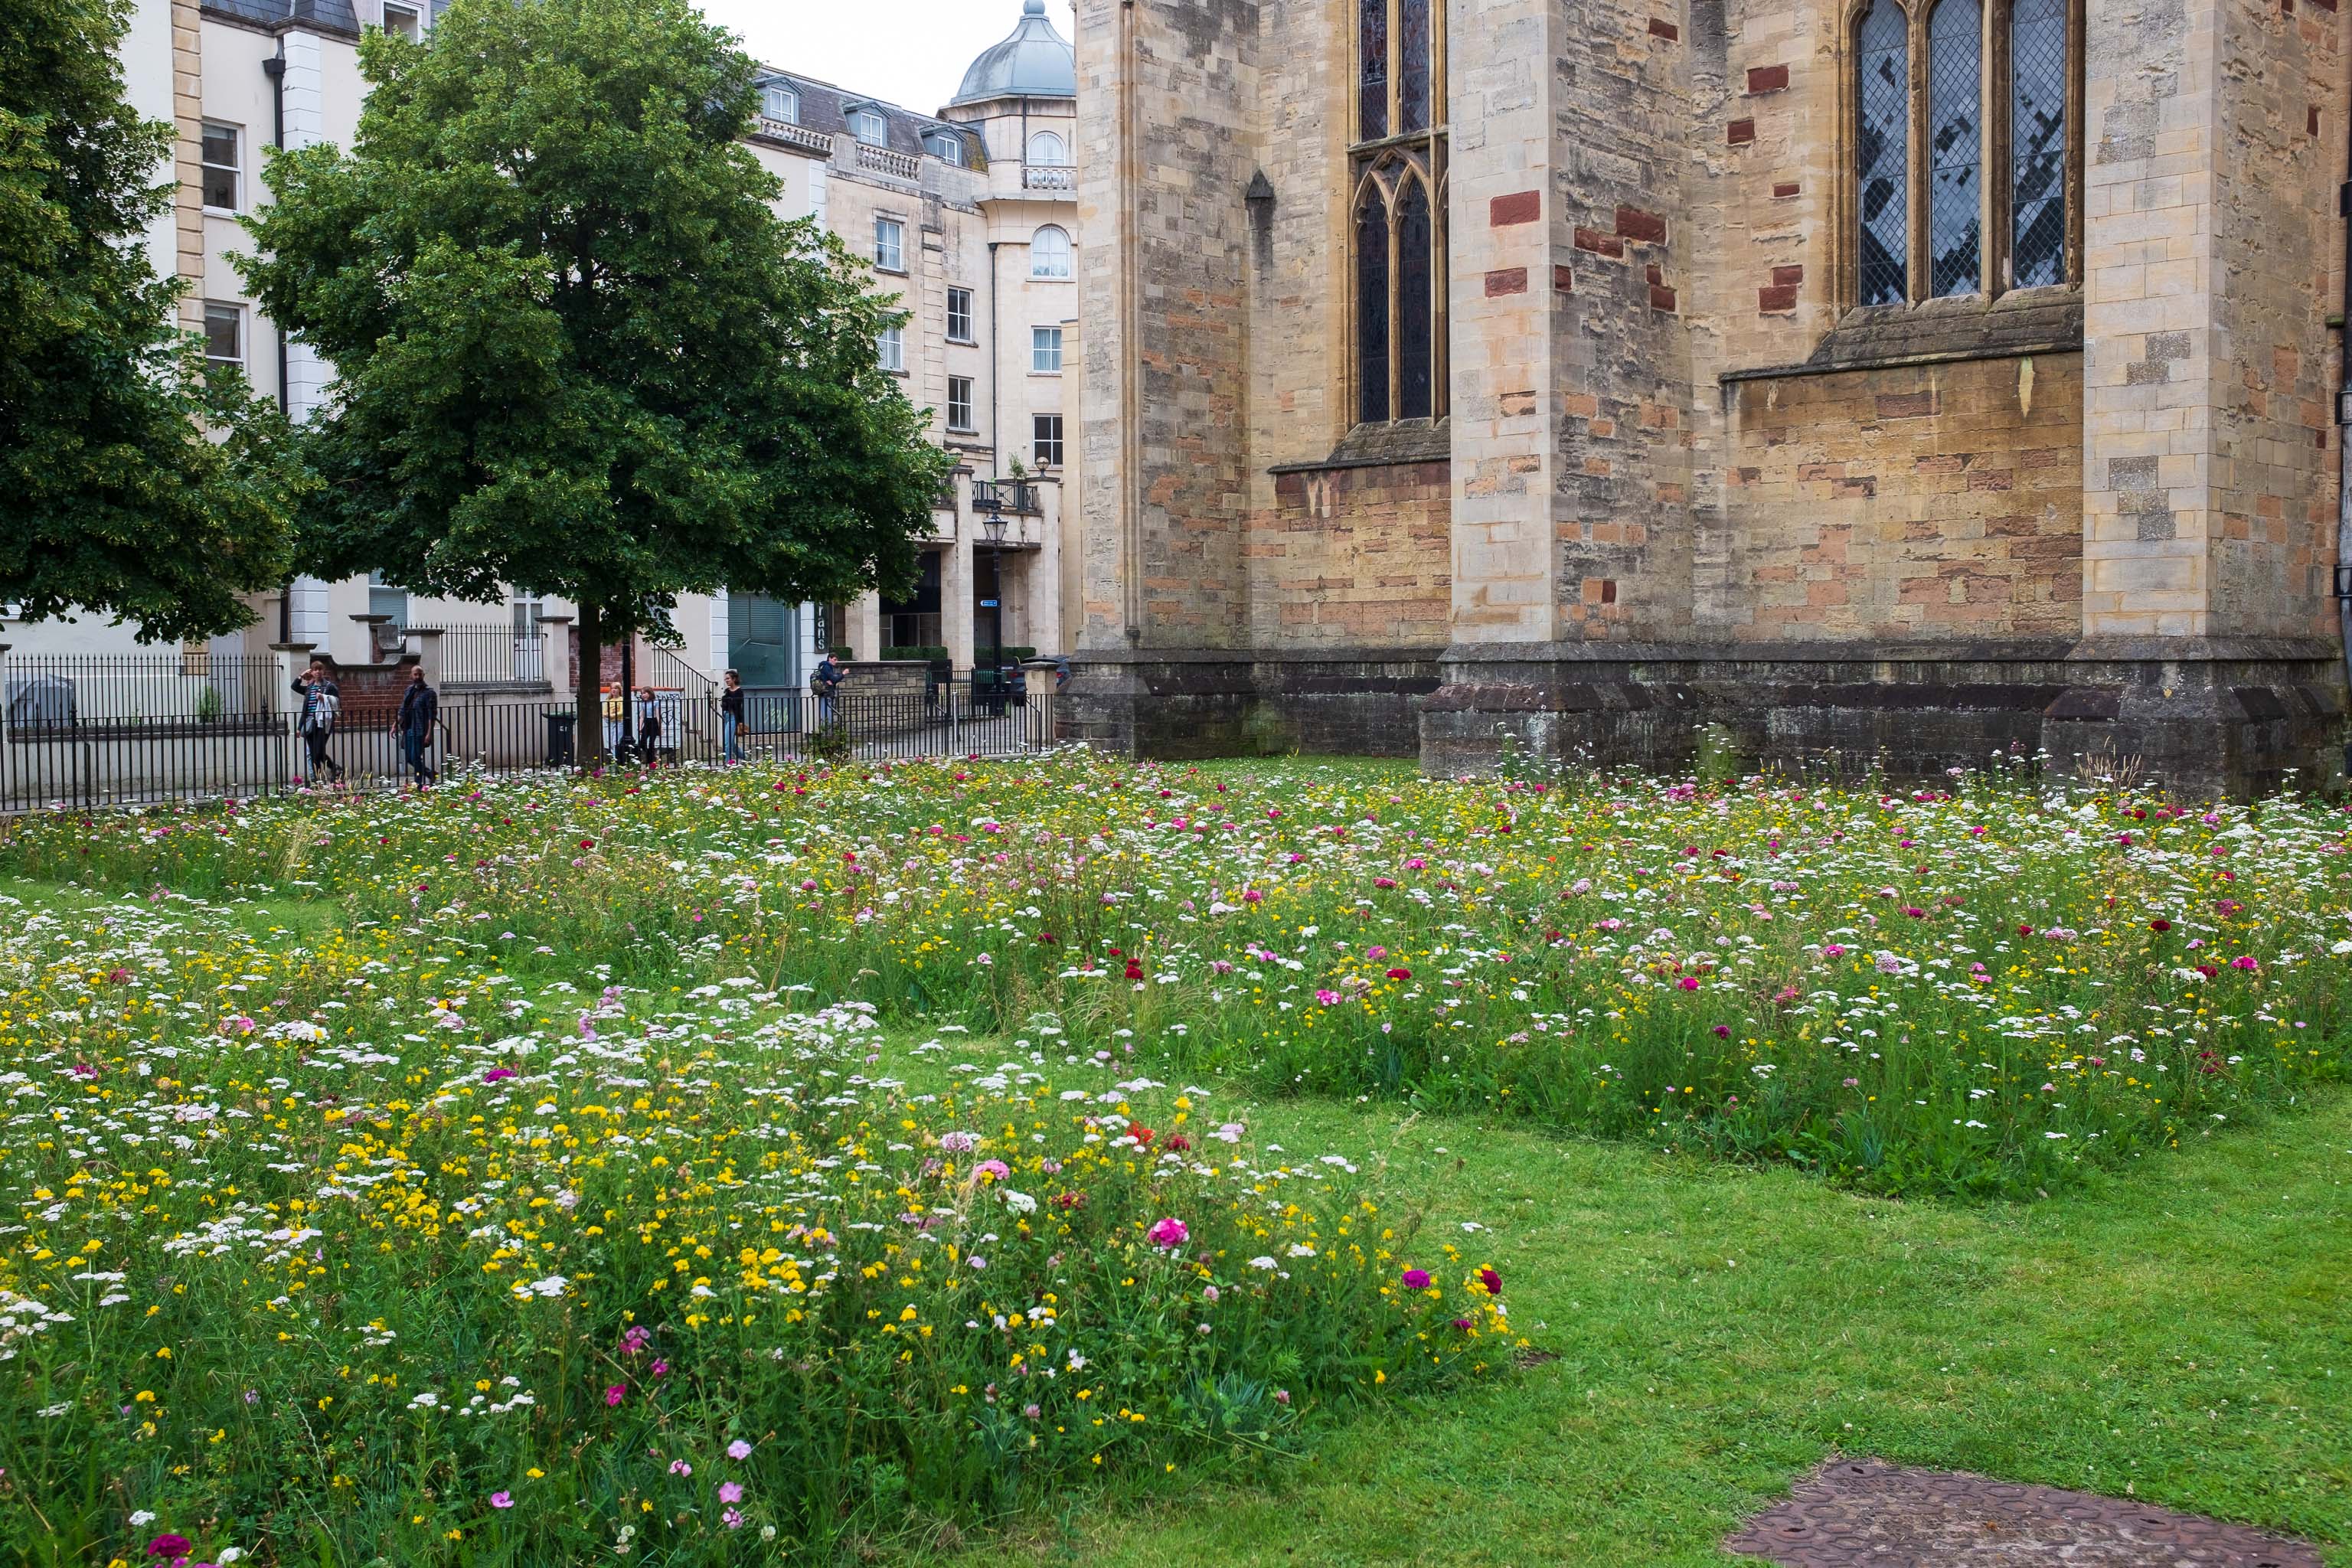 Wildflower Garden
Next to the Cathedral. Which I've still never set foot inside. I should probably put that on the list...
